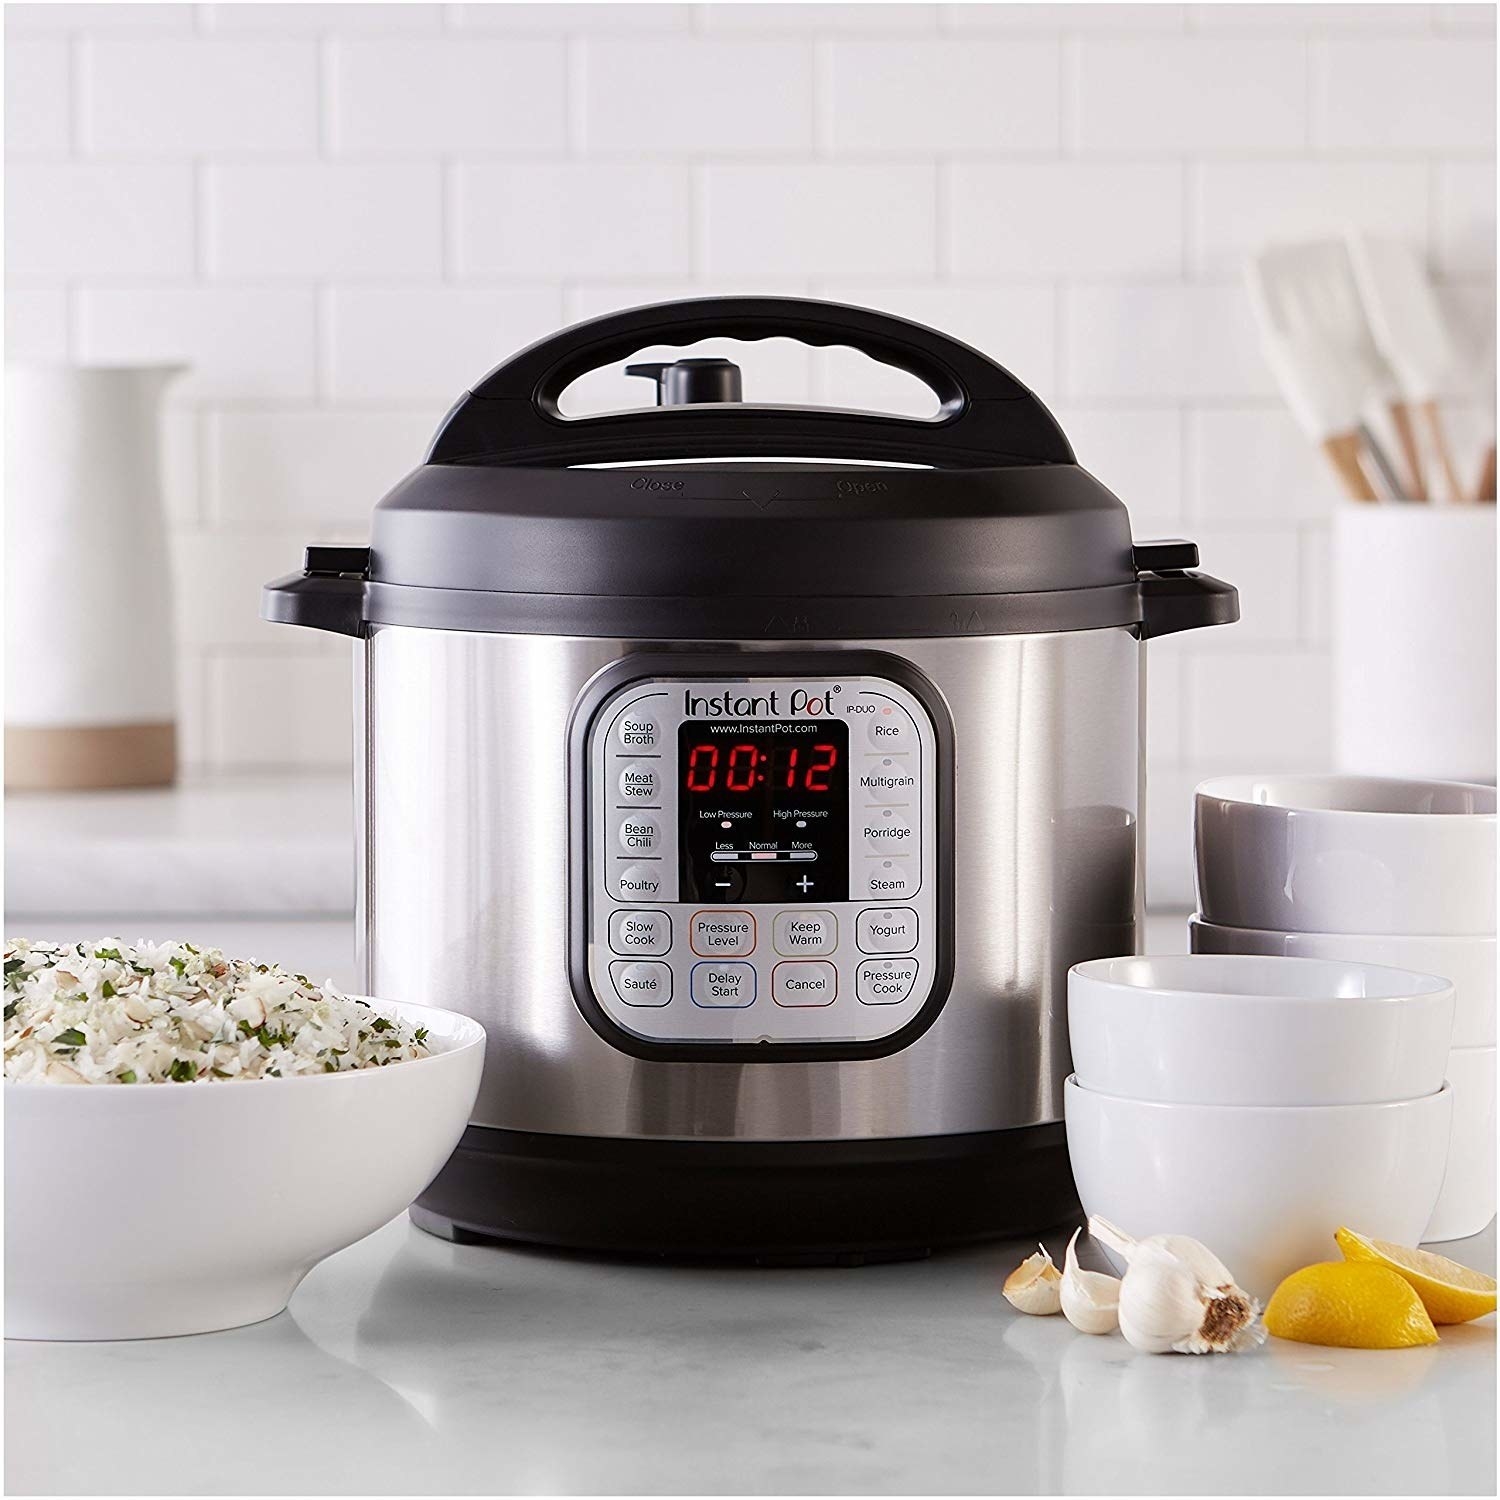 The Instant Pot sitting on a kitchen counter, surrounded by some ingredients